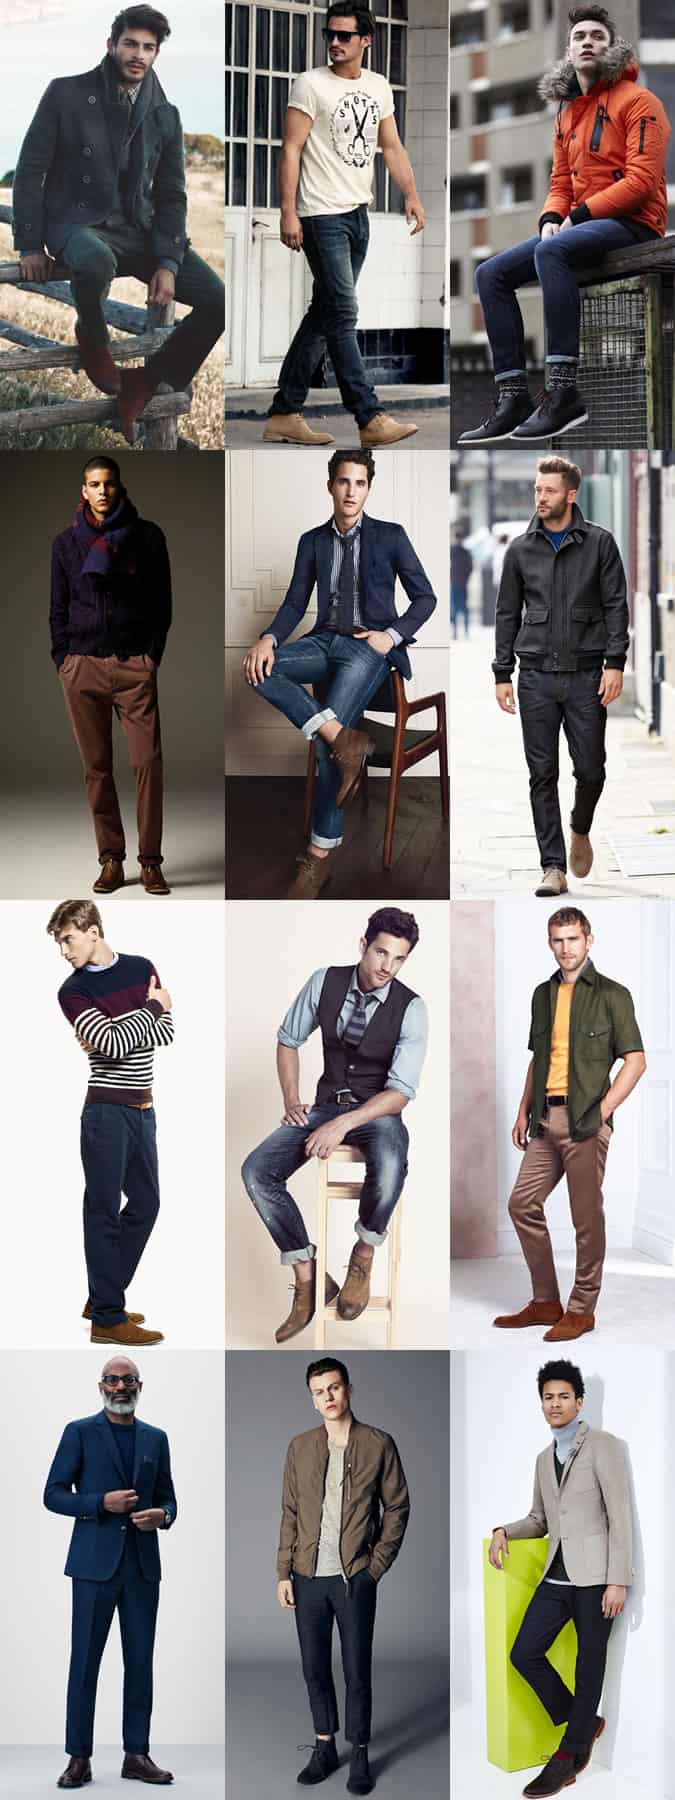 Men's Chukka Boots - Transitional Outfit Inspiration Lookbook